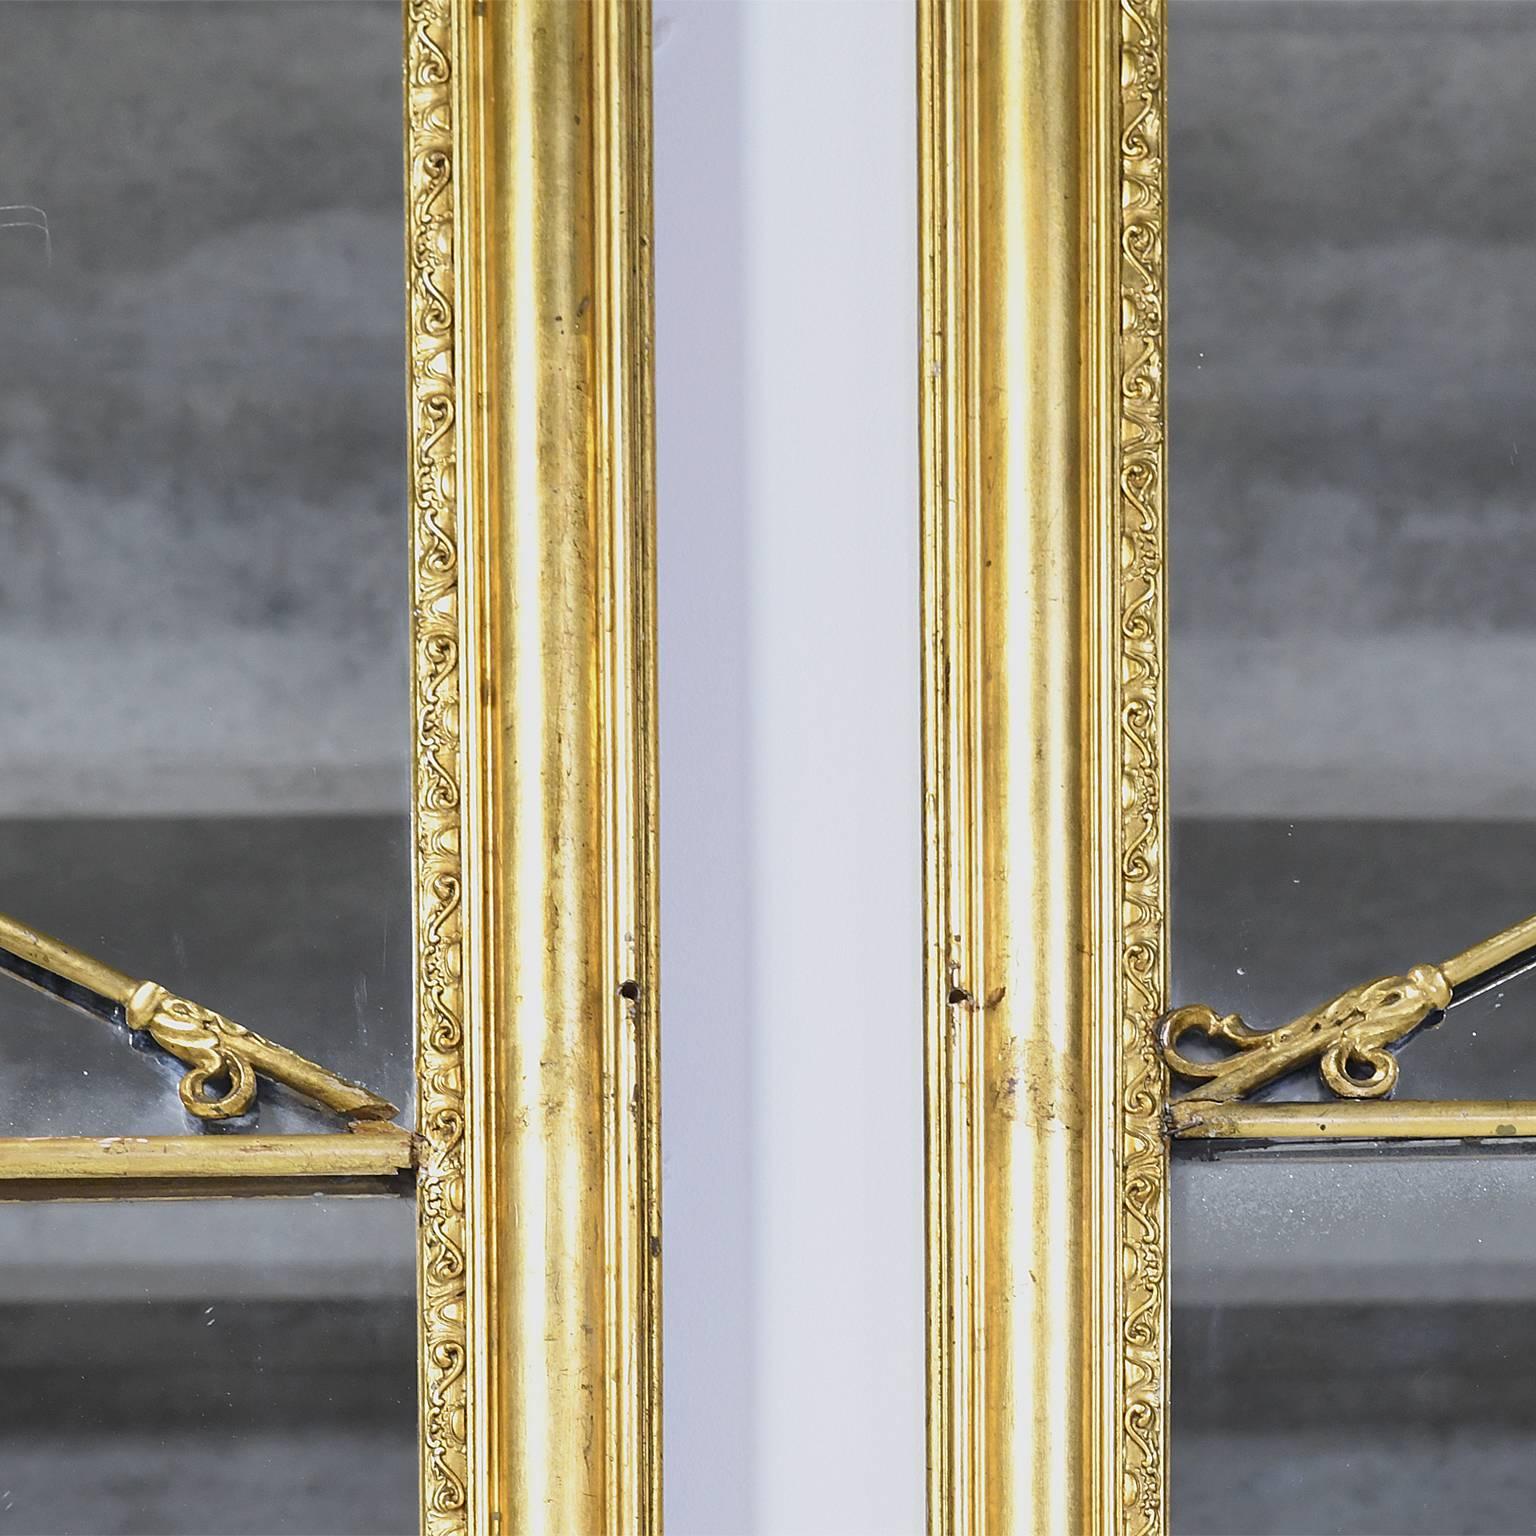 Carved Pair of Colossal Scandinavian Empire-Style Giltwood Mirrors, circa 1880